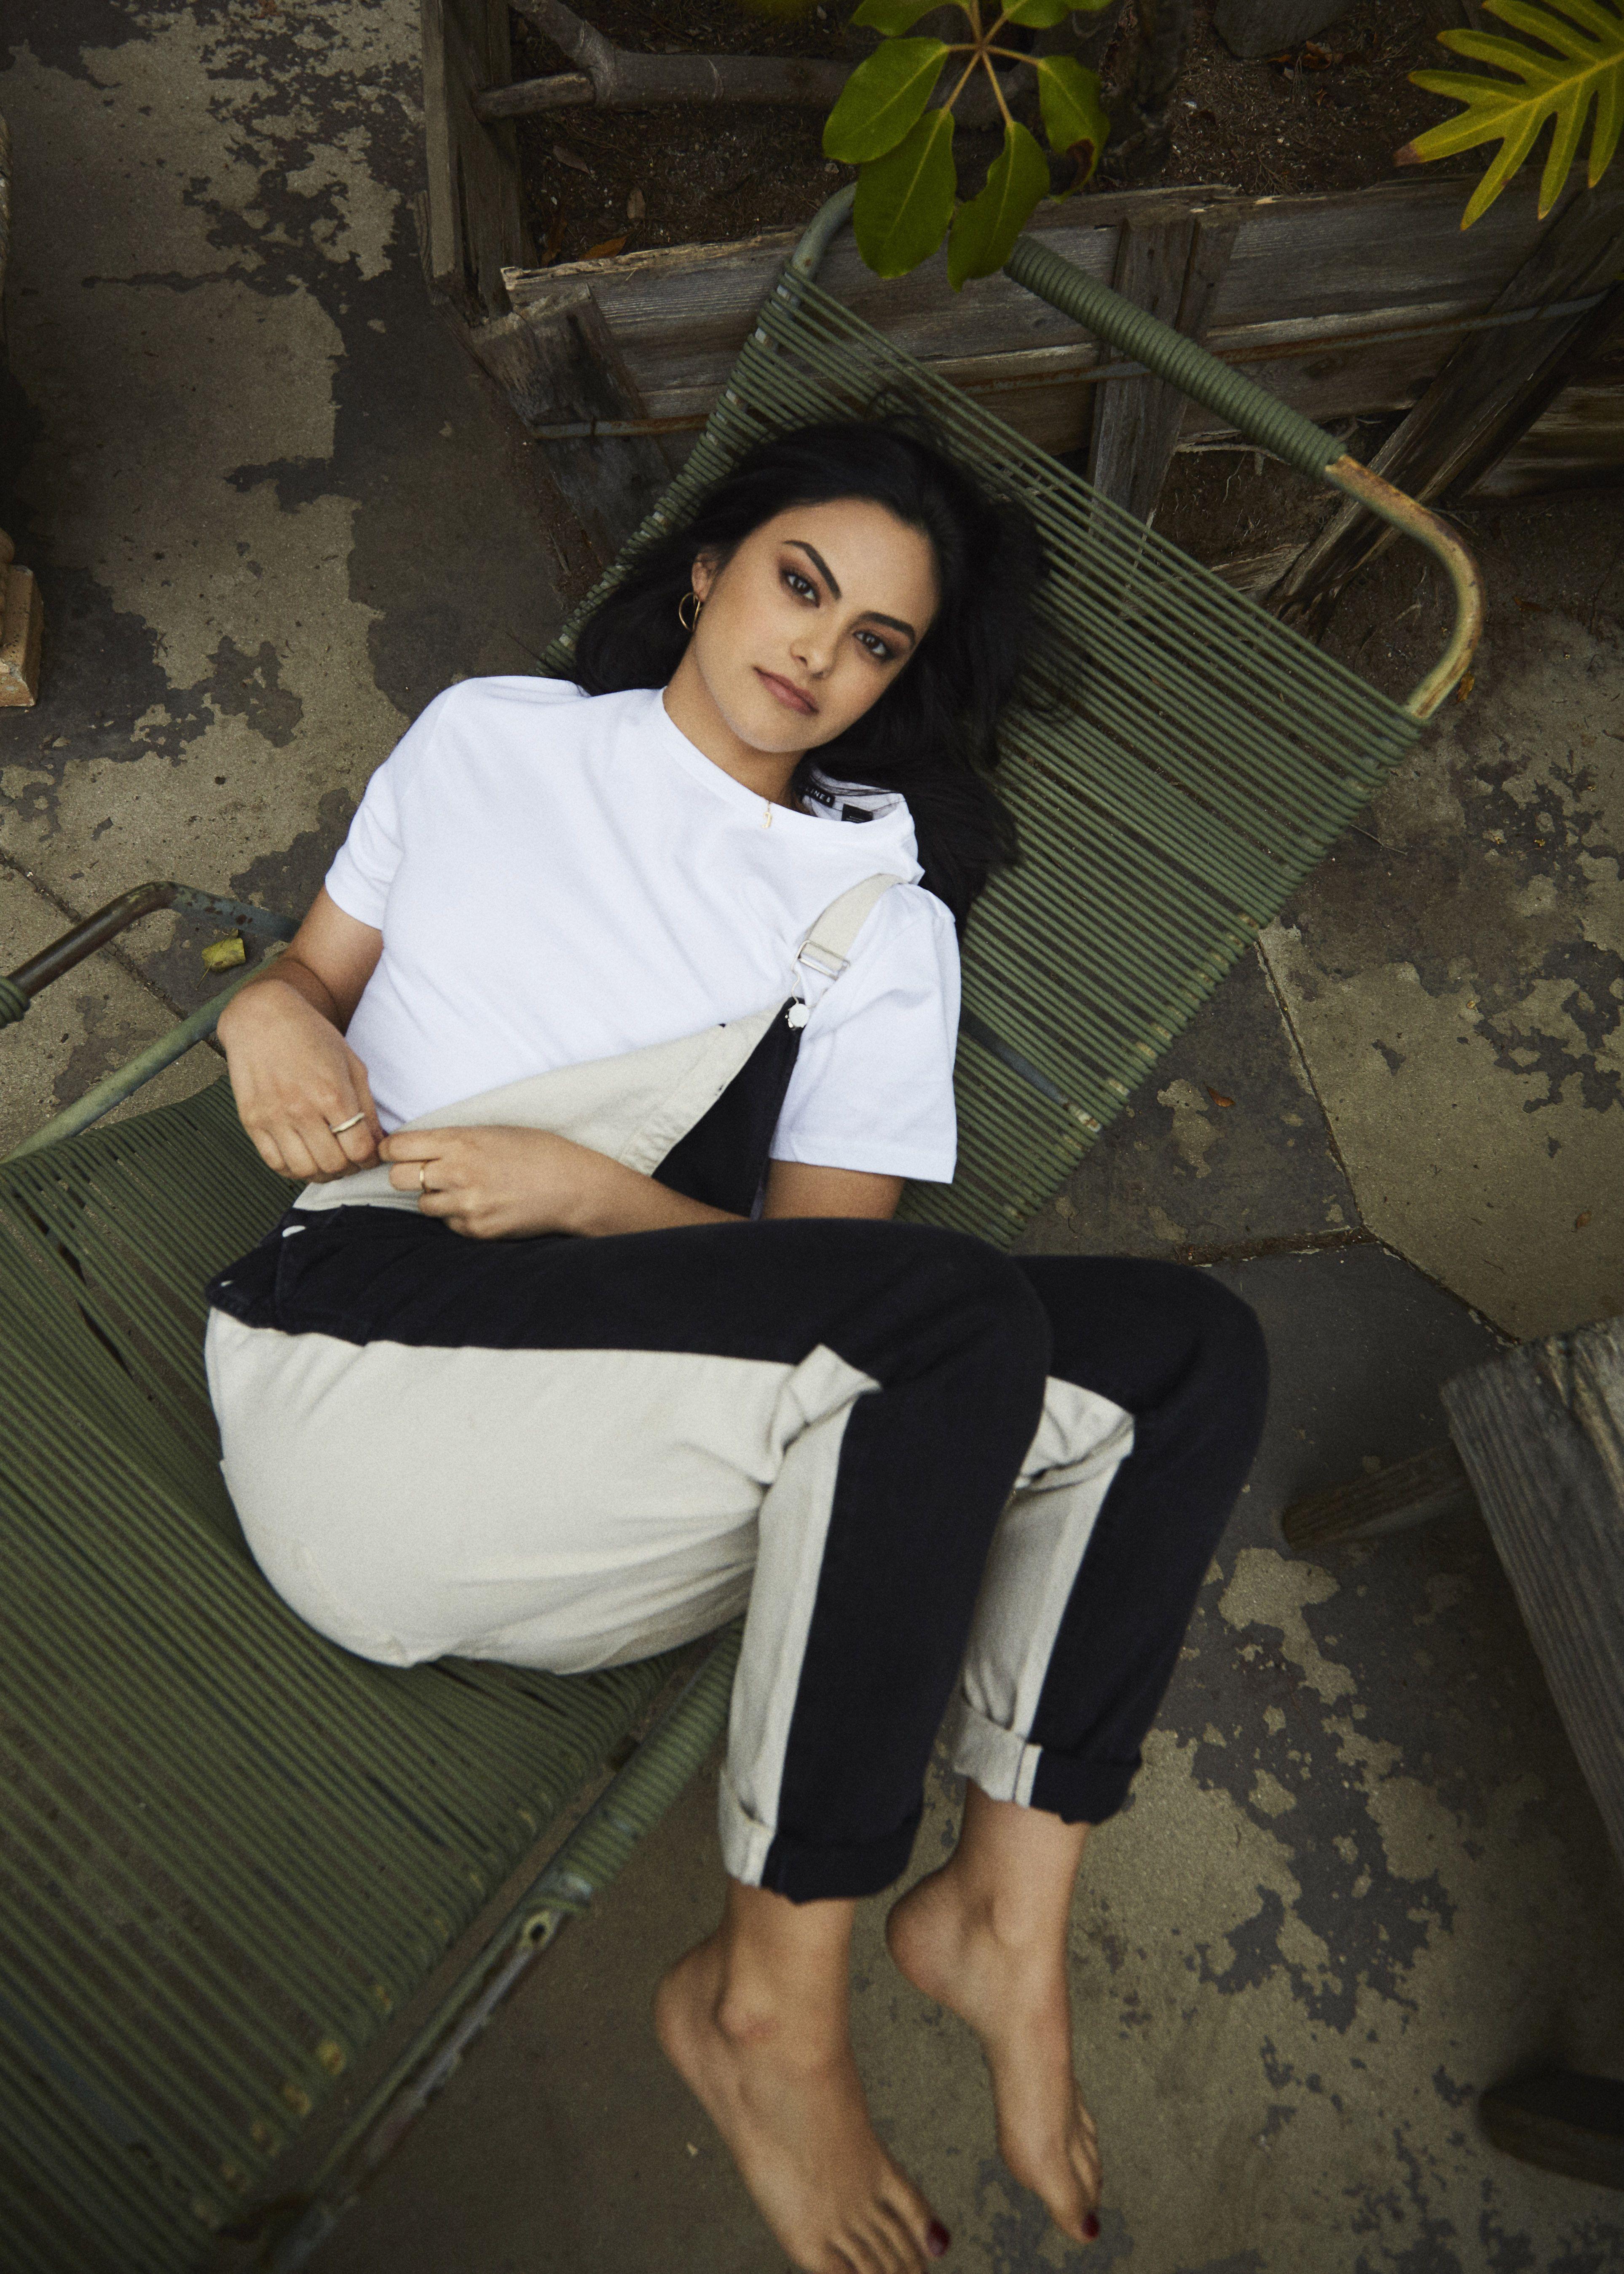 Meet Camila Mendes, Breakout Star of 'Riverdale'. Awesome People